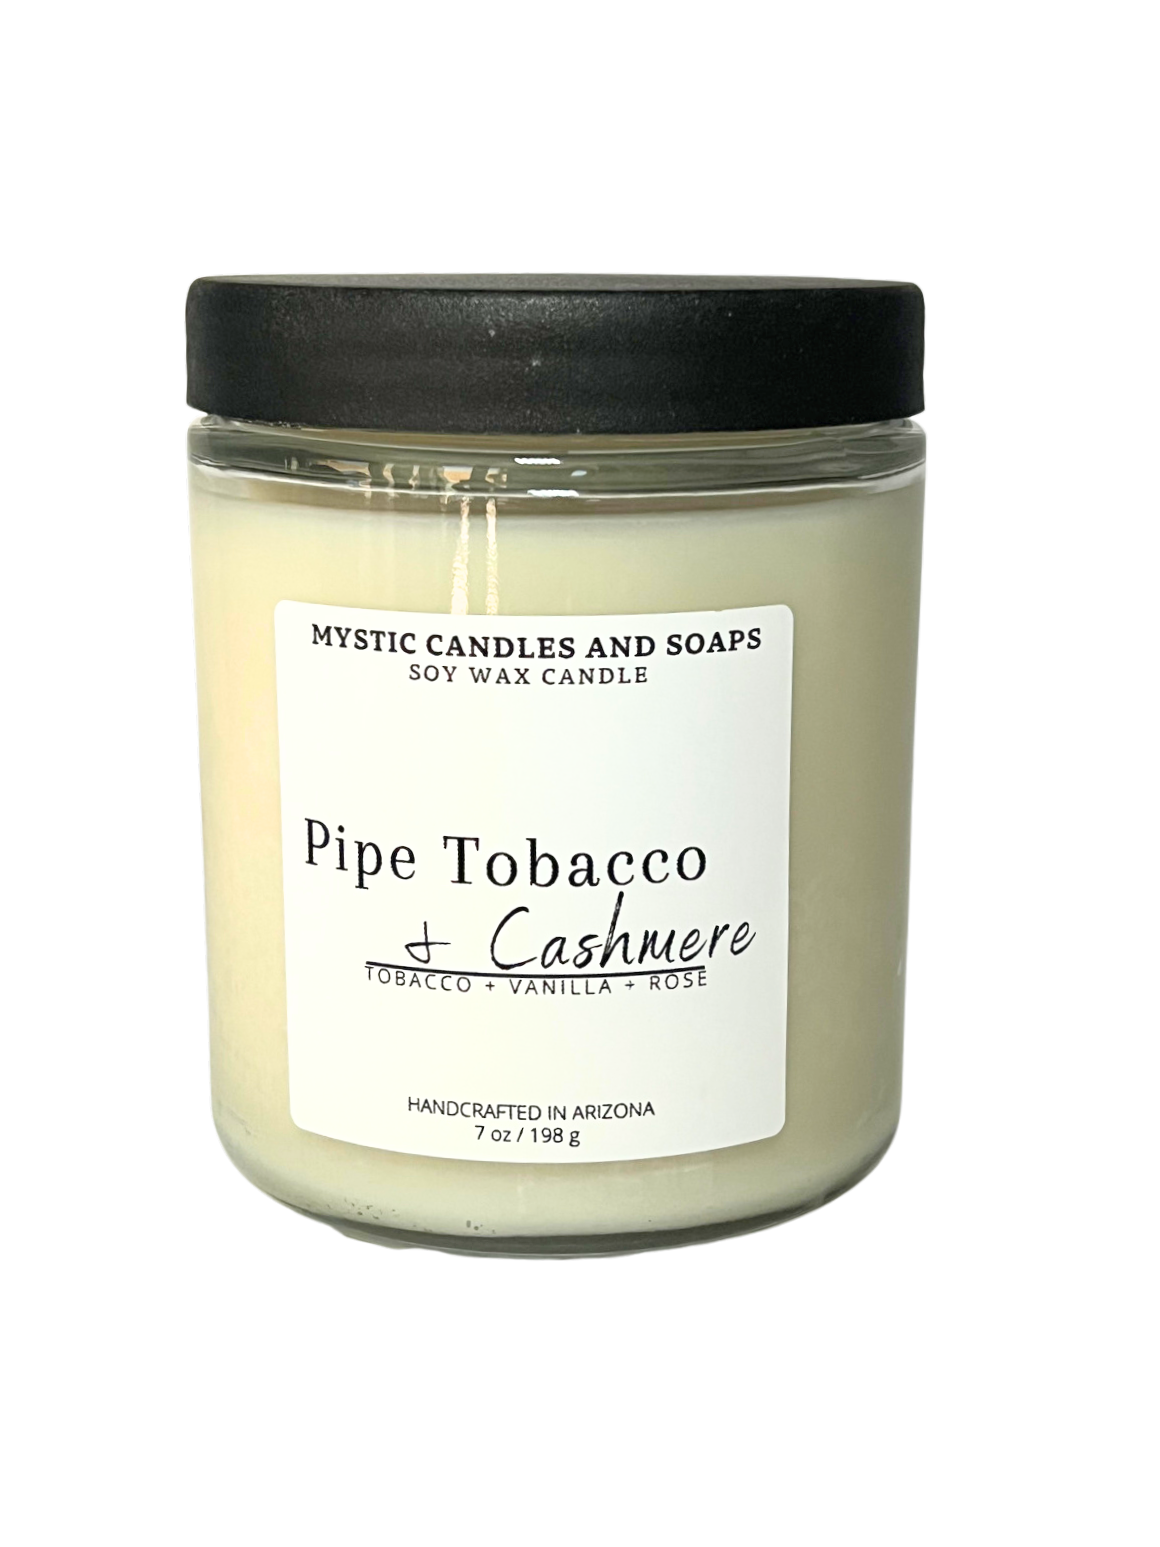 Pipe Tobacco & Cashmere Candle - Mystic Candles and Soaps LLC